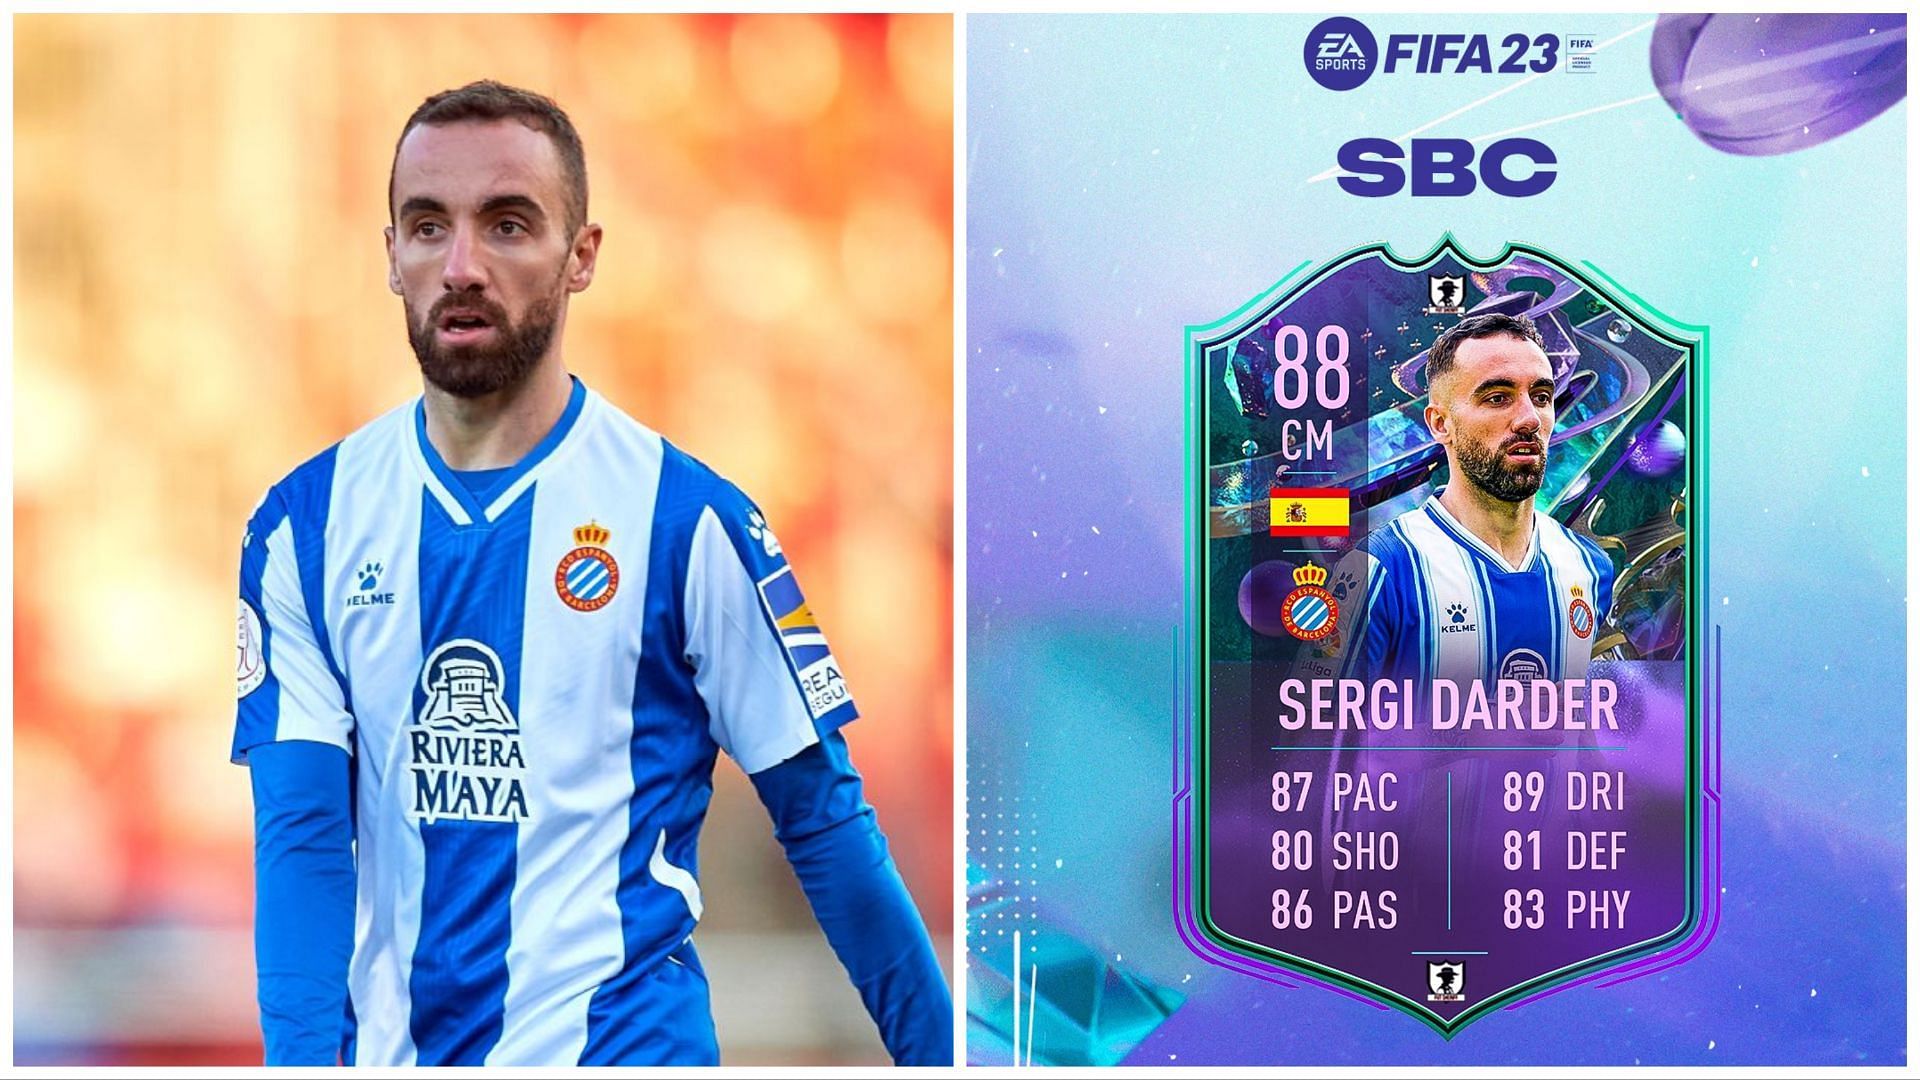 Fantasy FUT Sergi Darder has been leaked (Images via Getty and Twitter/FUT Sheriff)